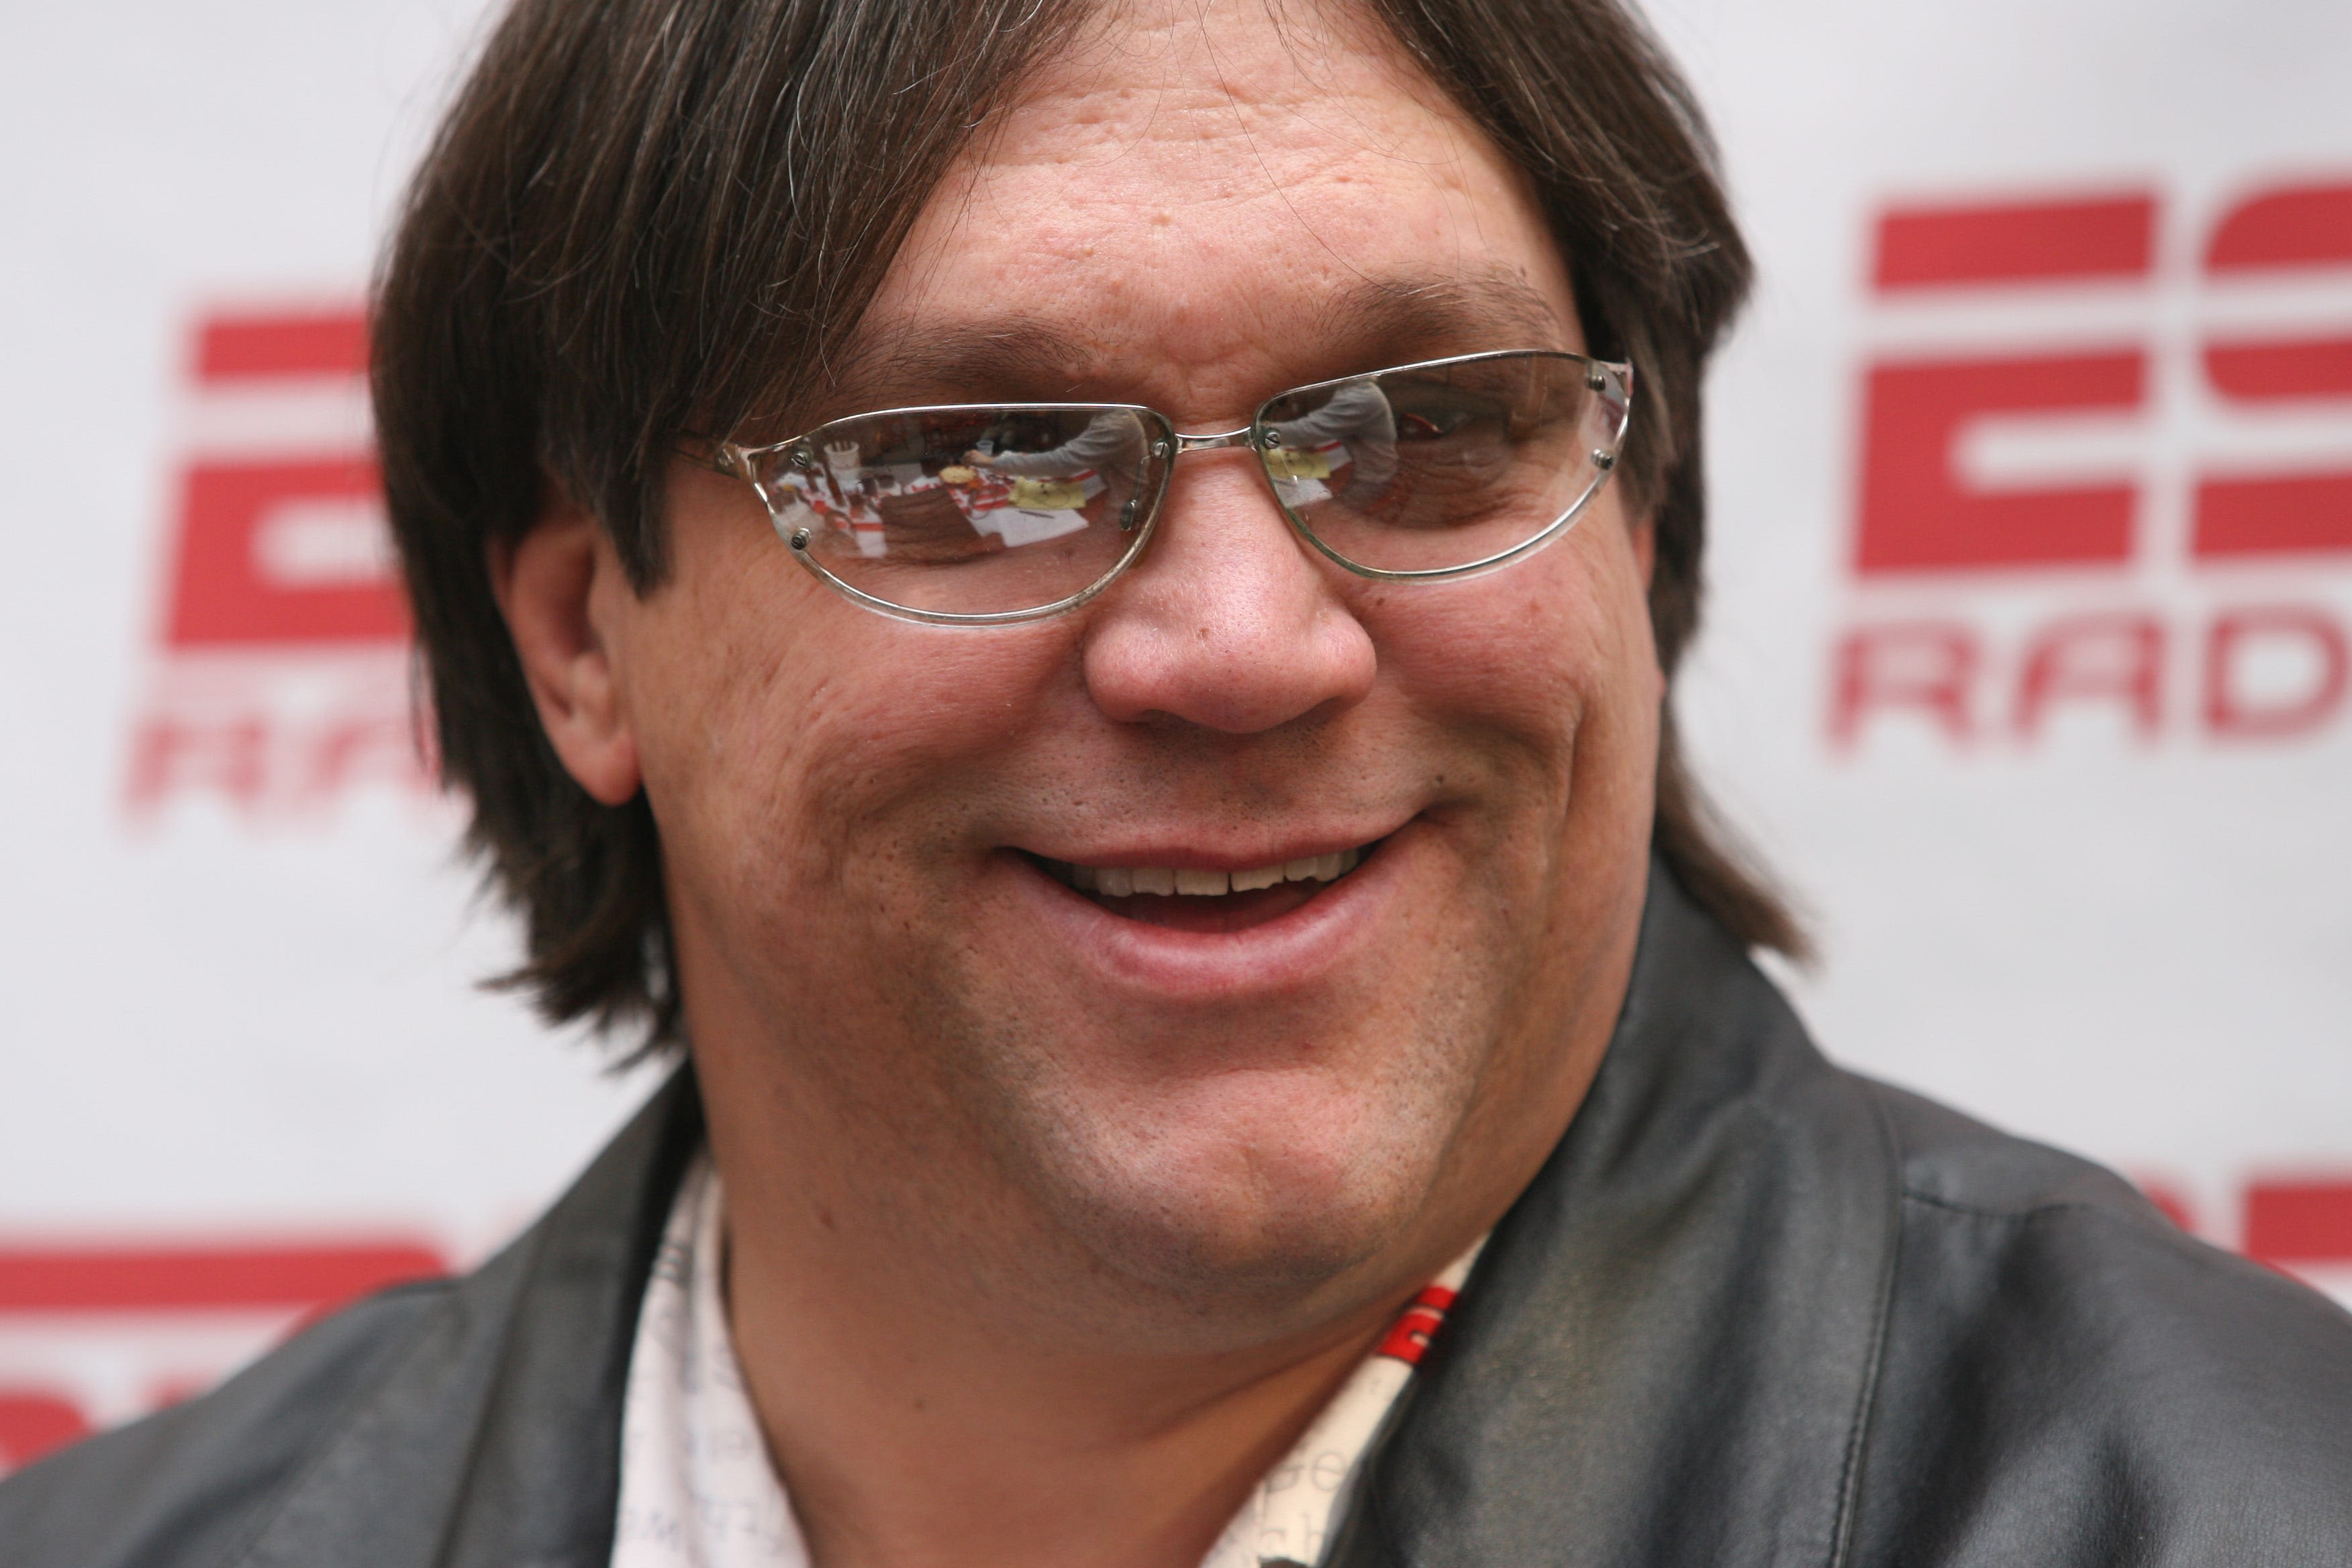 Steve McMichael, battling ALS, inducted into Hall of Fame in ceremony from home